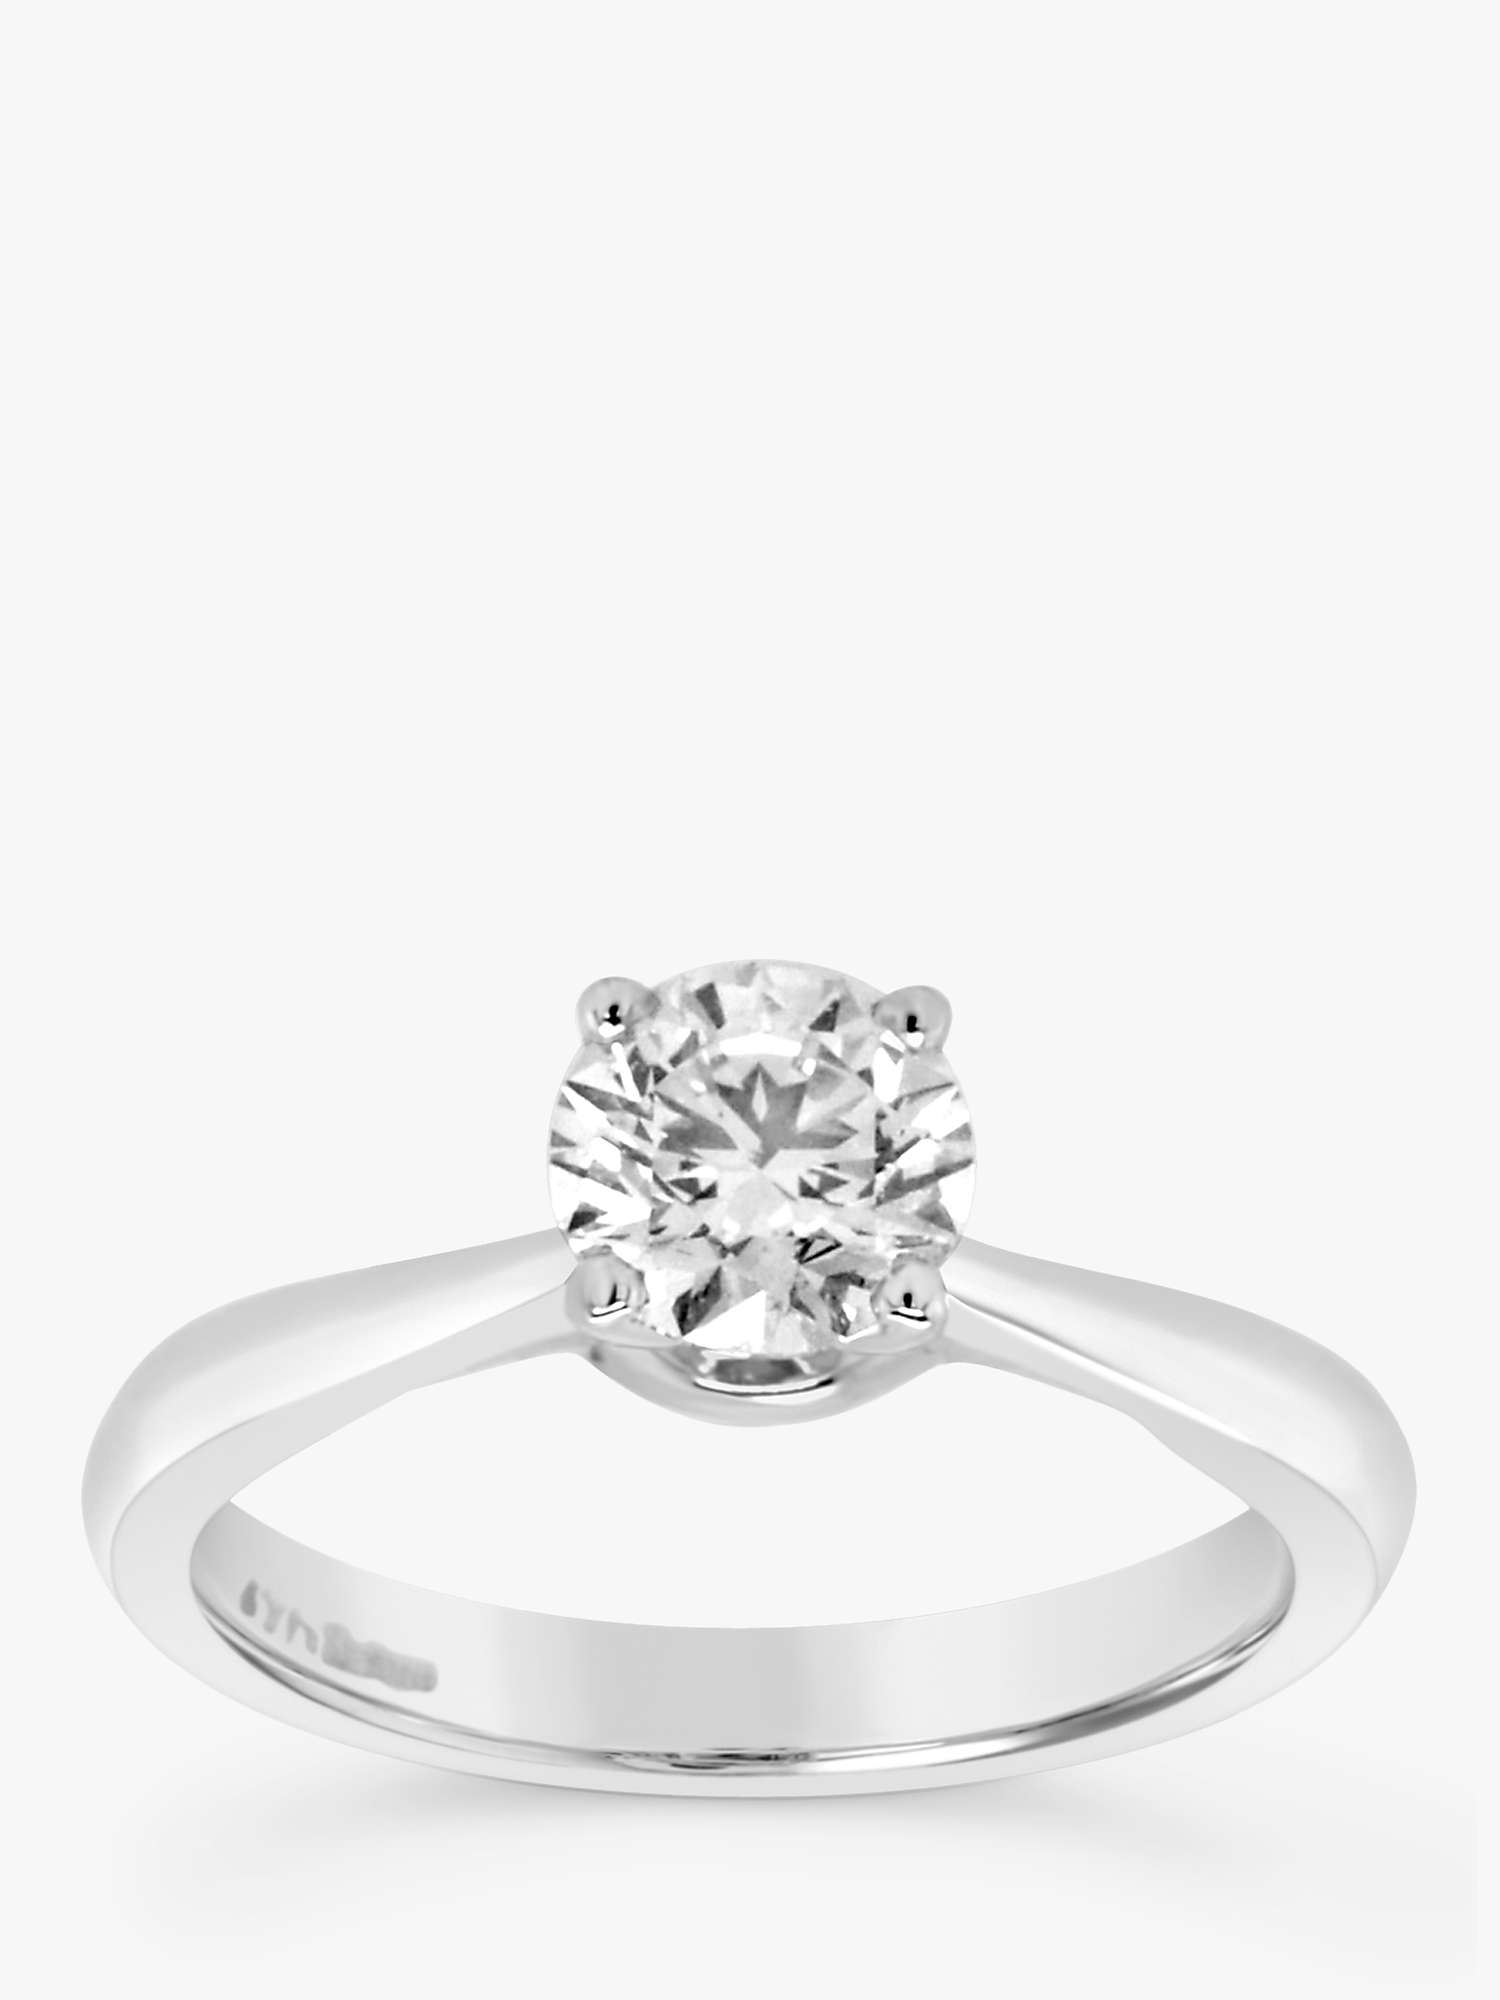 Buy Milton & Humble Jewellery Second Hand Platinum Diamond Solitaire Engagement Ring Online at johnlewis.com